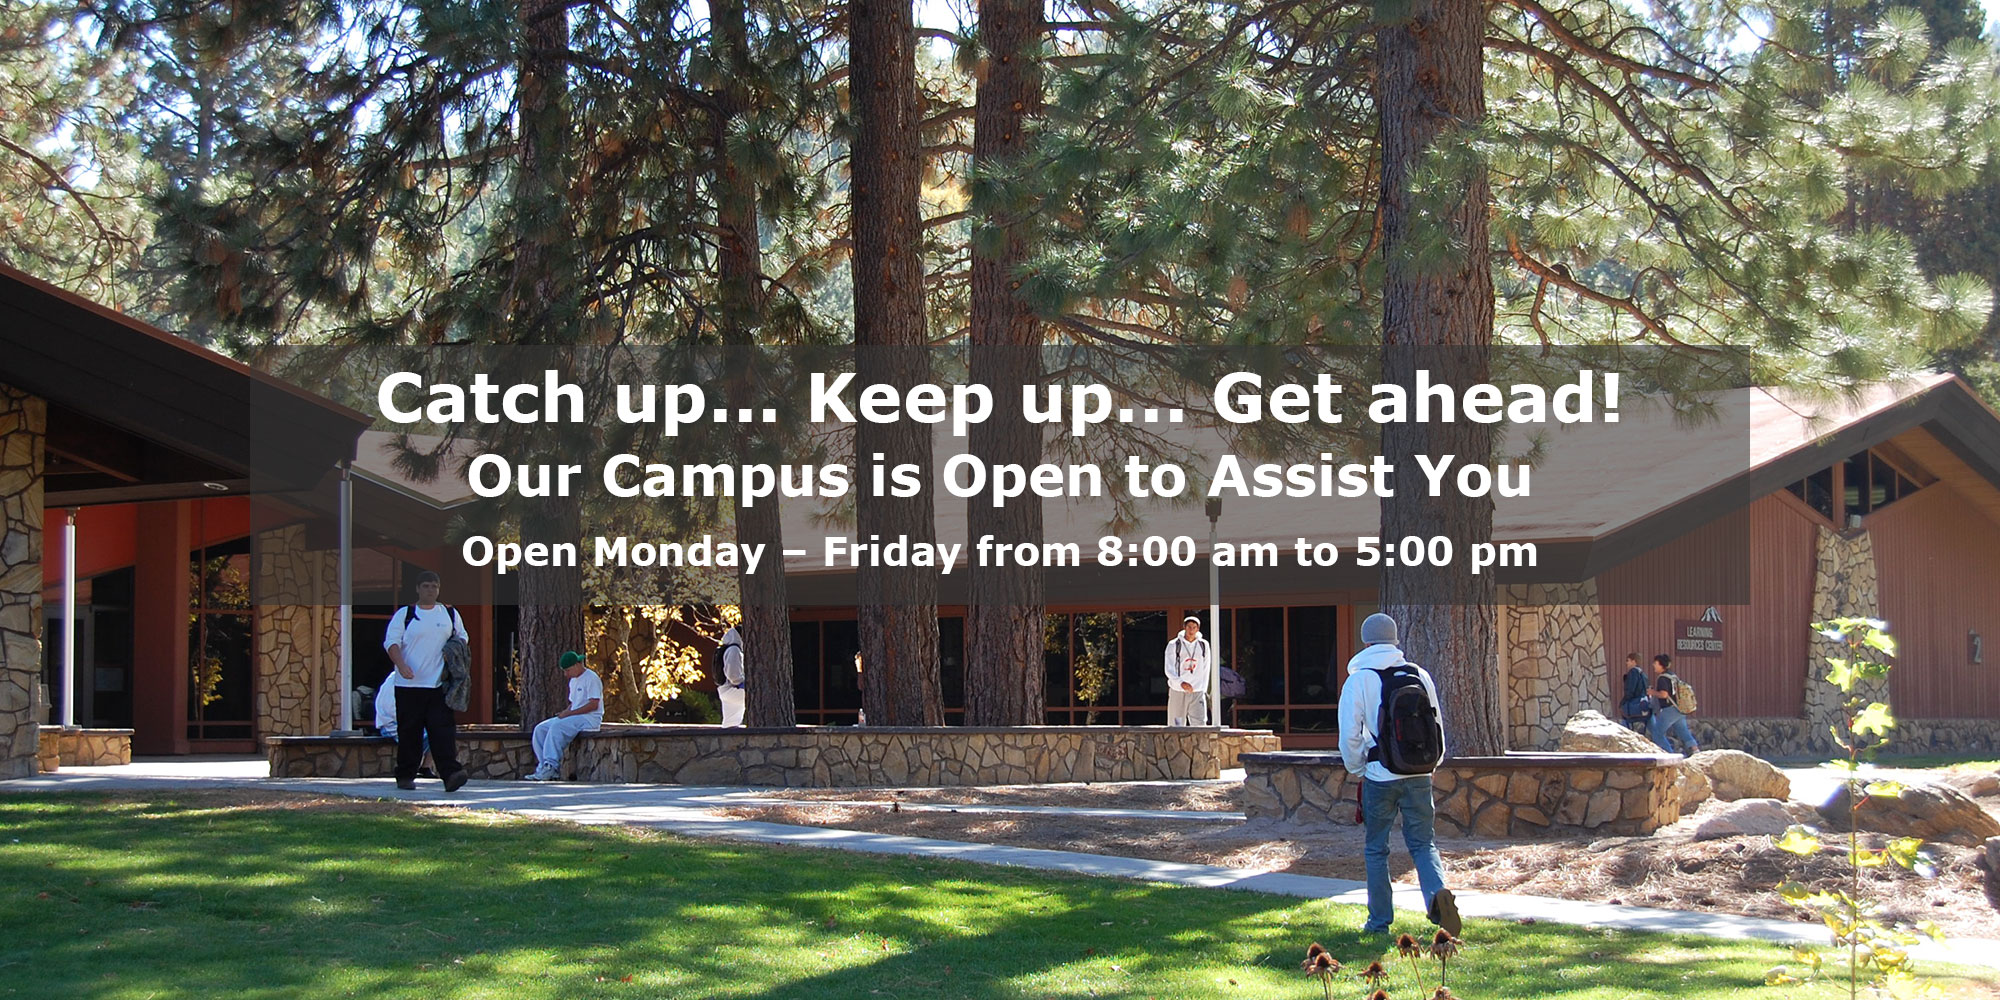 Catch up... Keep up... Get ahead! Our Campus is Open to Assist You. Open Monday – Friday from 8:00 am to 5:00 pm.